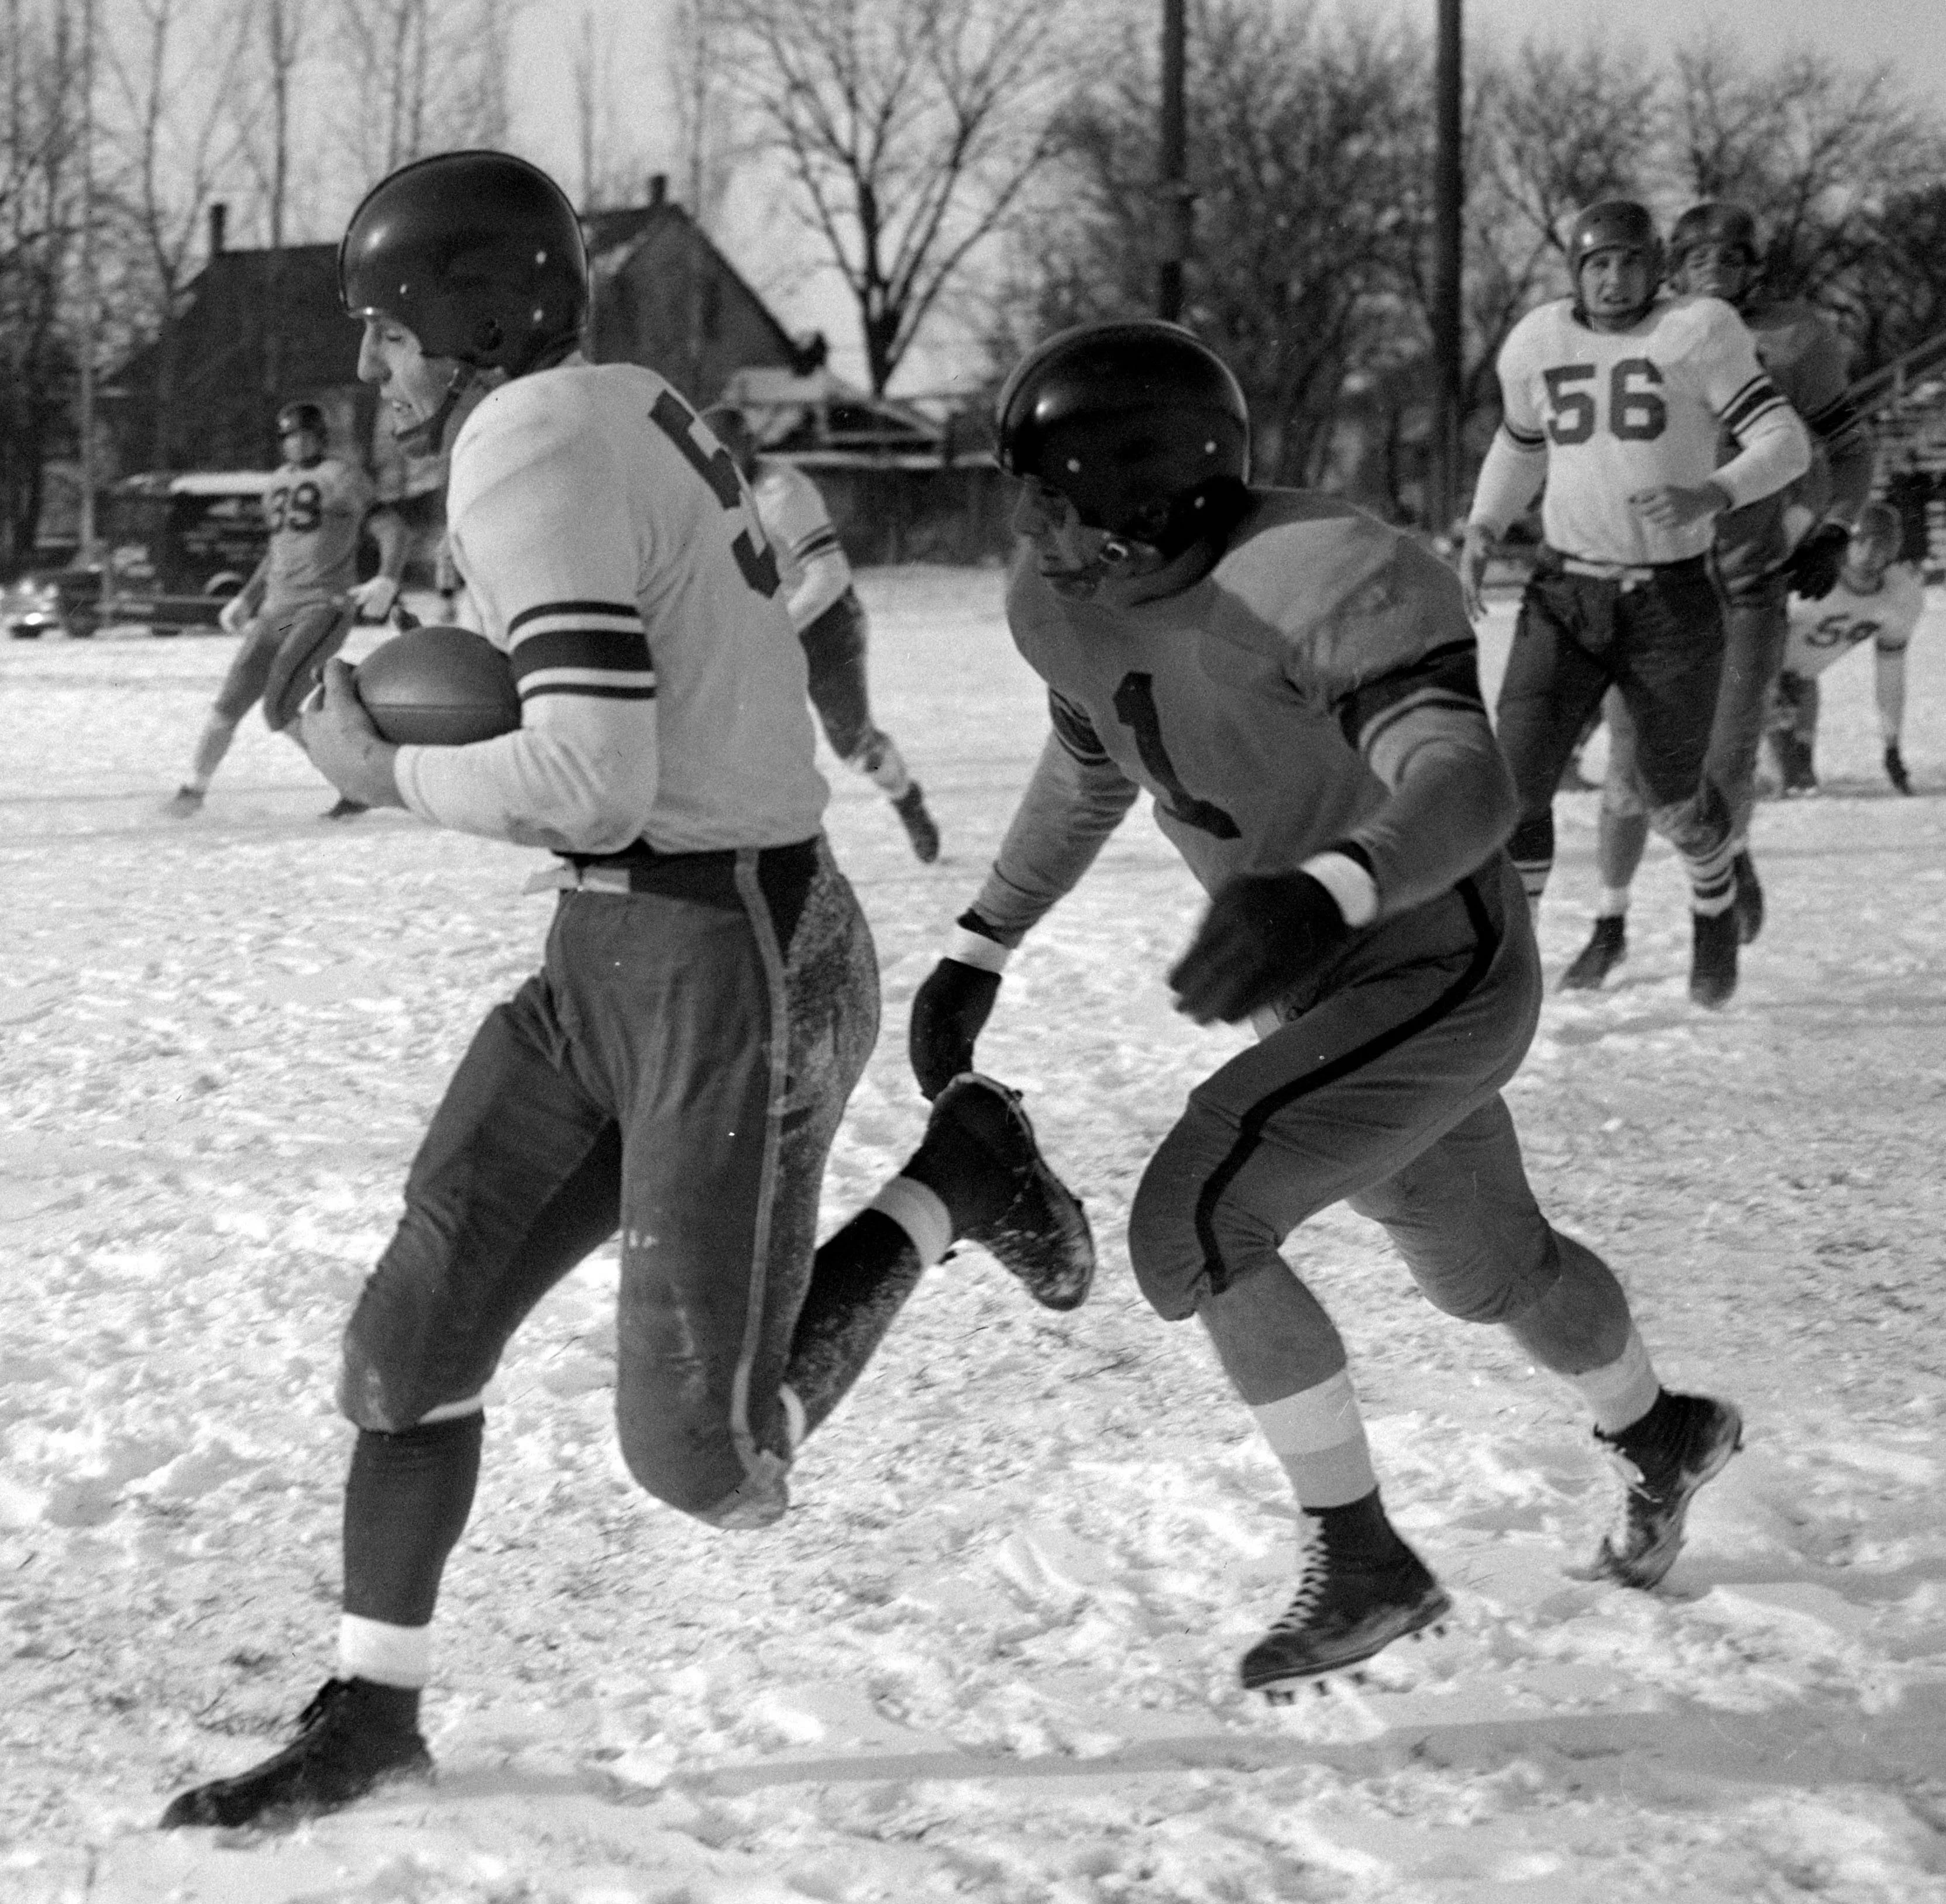 football game in the snow